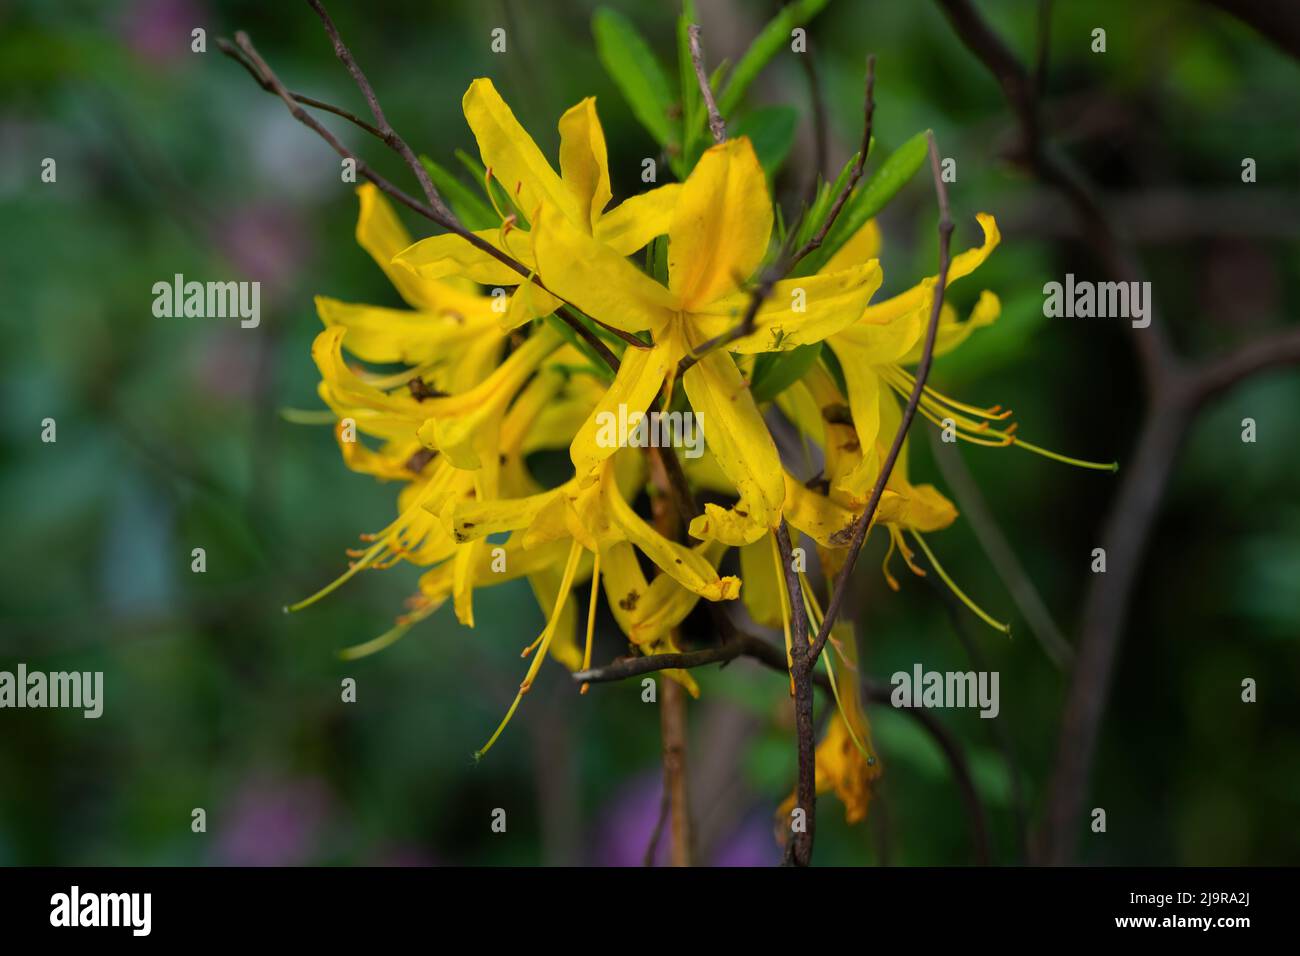 Blooming flower of Rhododendron Luteum Sweet, Yellow Azalea or Honeysuckle Azalea, flowering plant in the family Ericaceae. Stock Photo